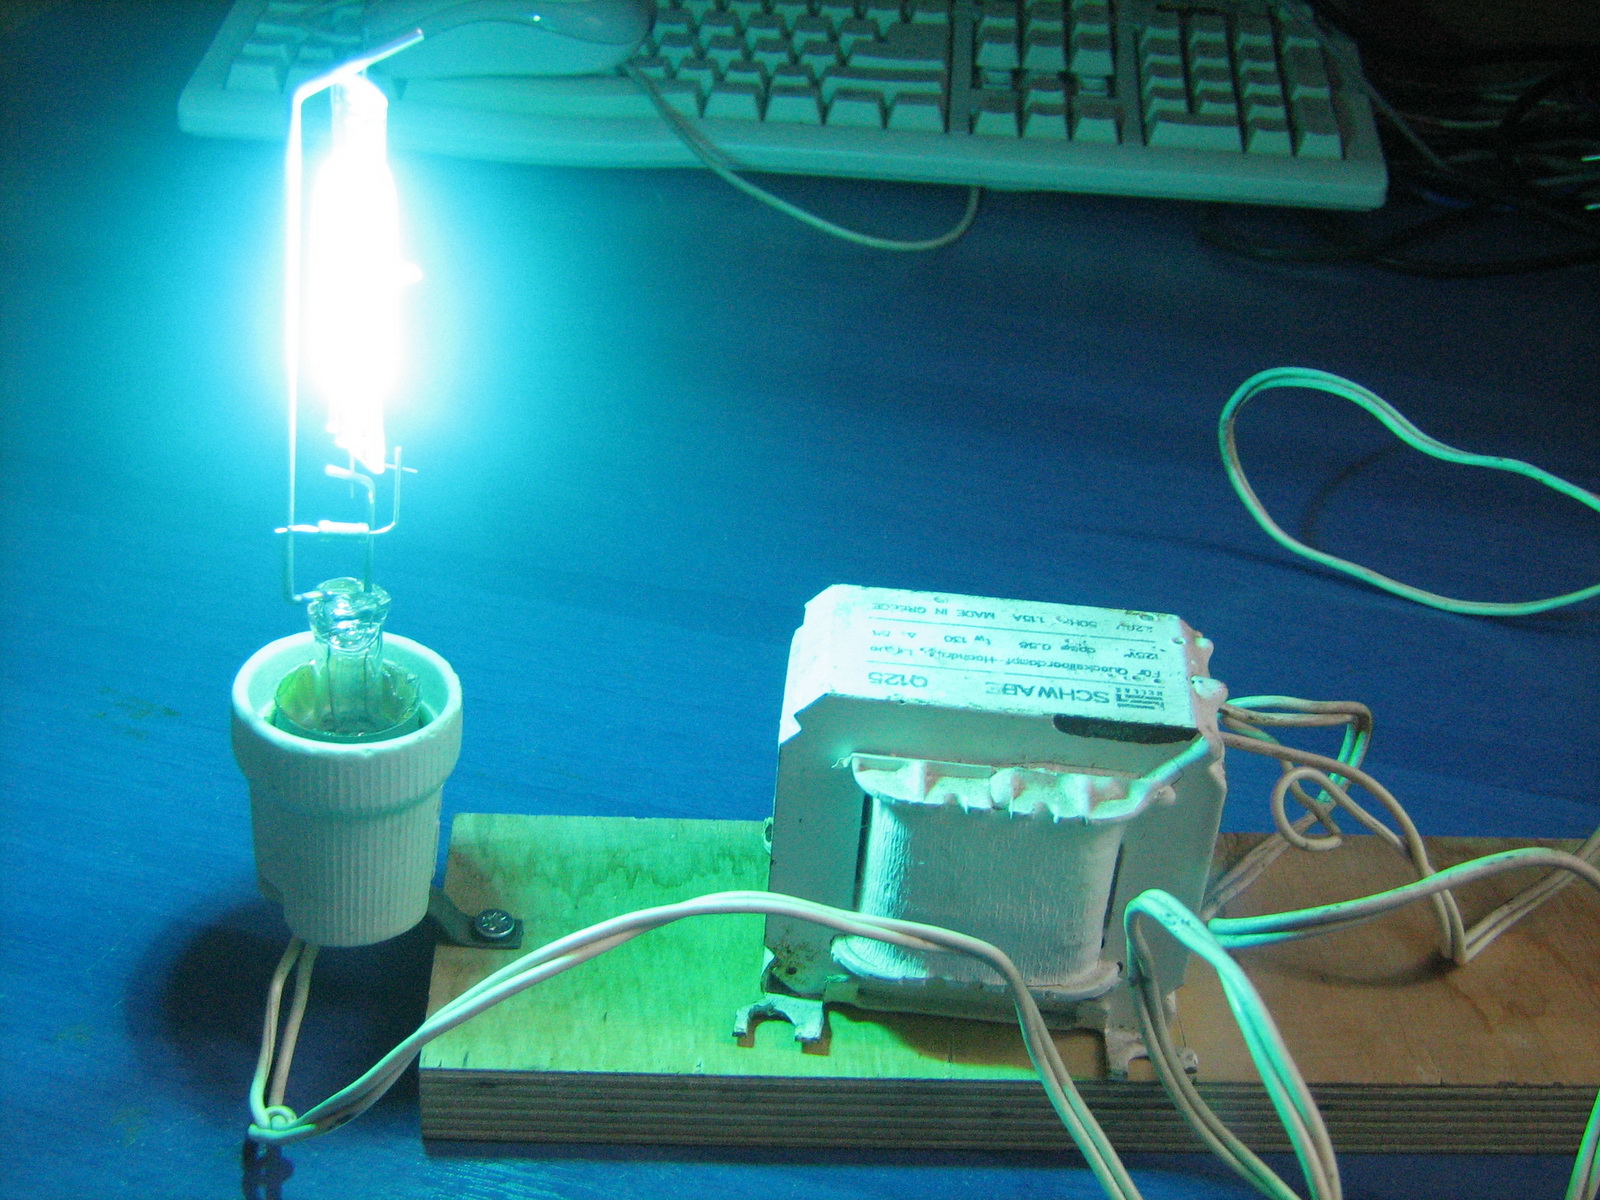 Transforming a Hg Lamp into a powerful UV Light Source